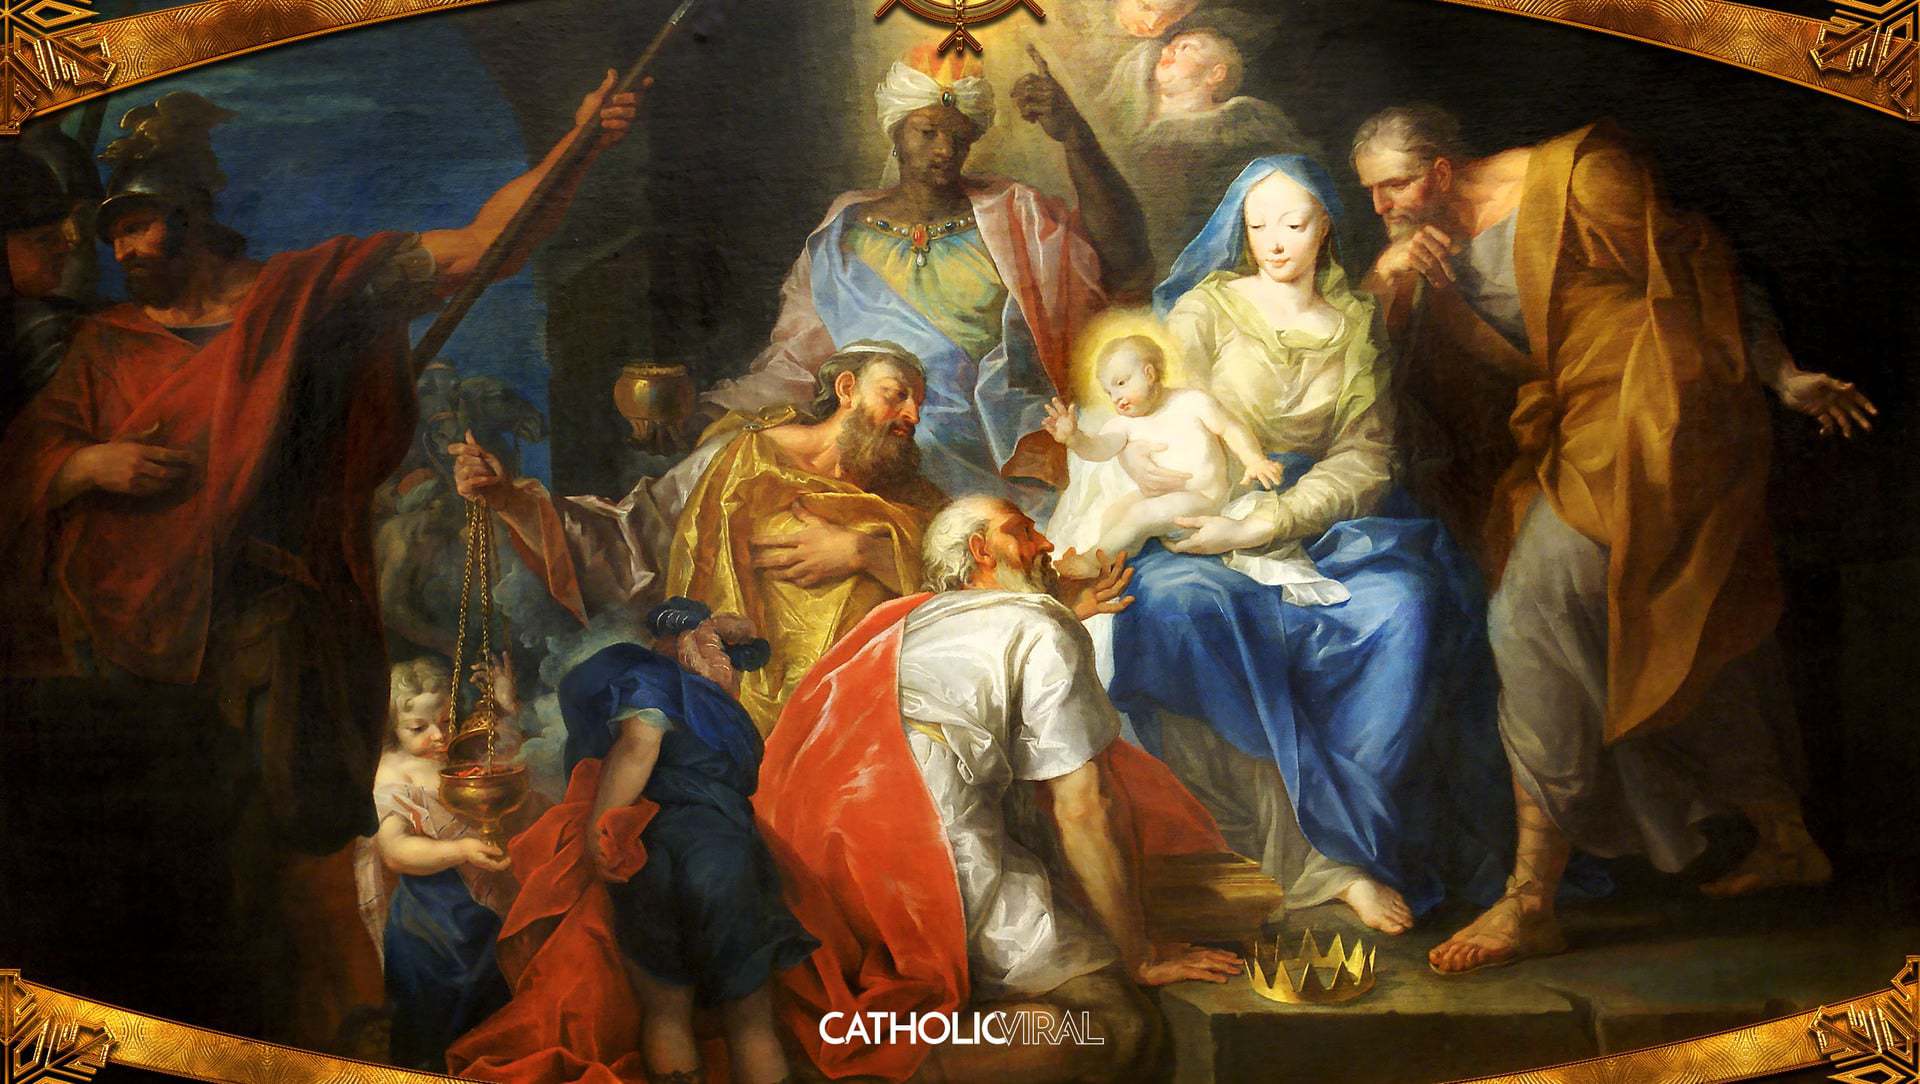 Gorgeous Classical Paintings of the Nativity- HD Christmas Wallpaper CatholicViral